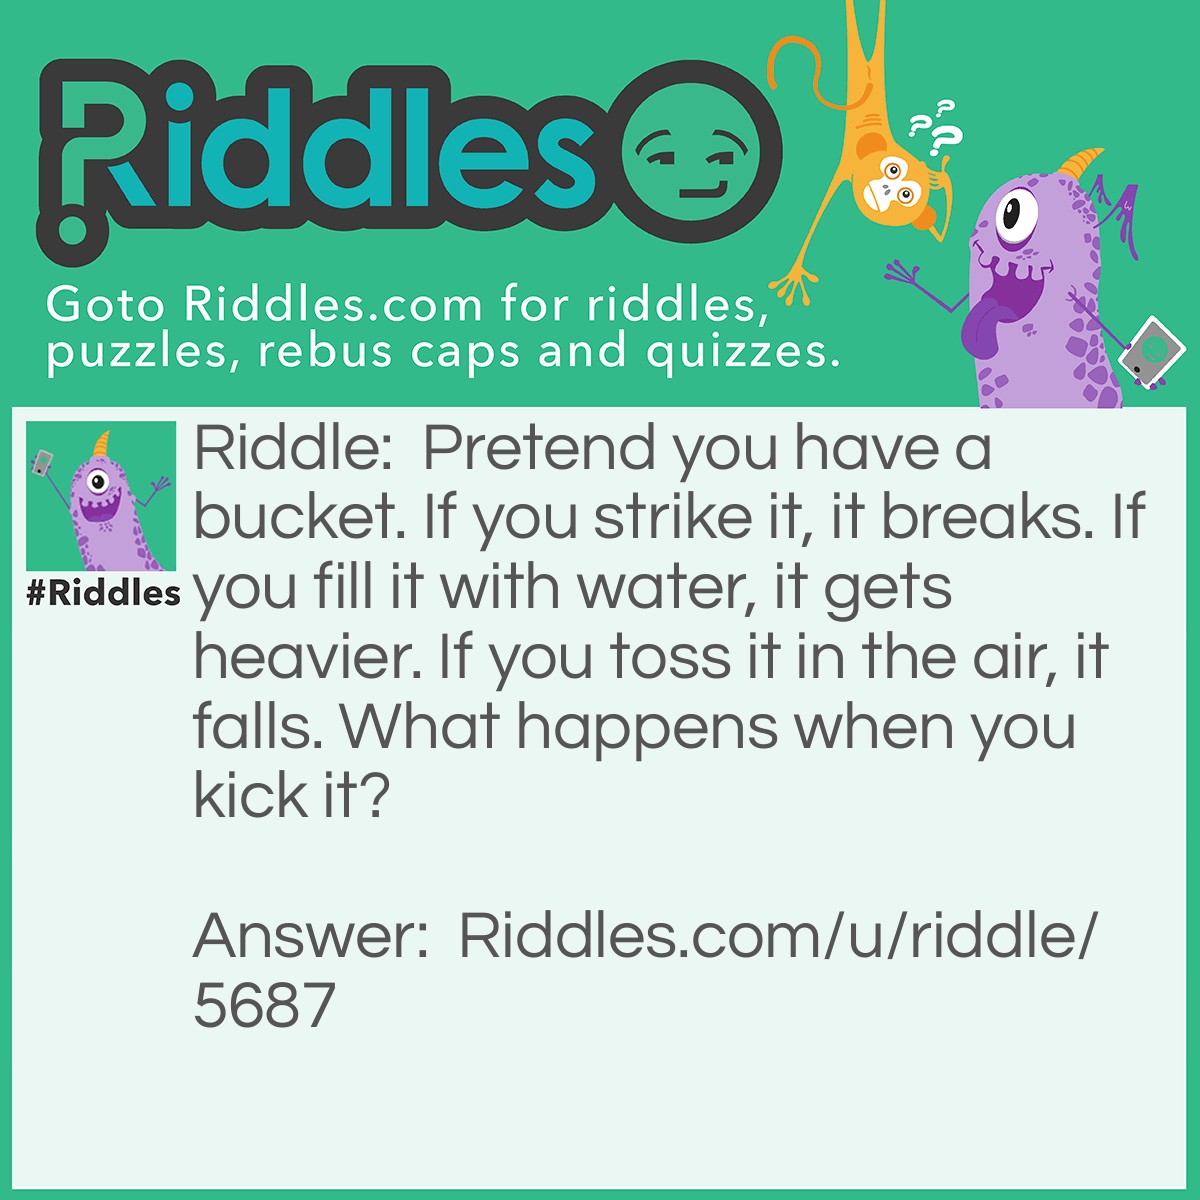 Riddle: Pretend you have a bucket. If you strike it, it breaks. If you fill it with water, it gets heavier. If you toss it in the air, it falls. What happens when you kick it? Answer: When you kick the bucket you die.